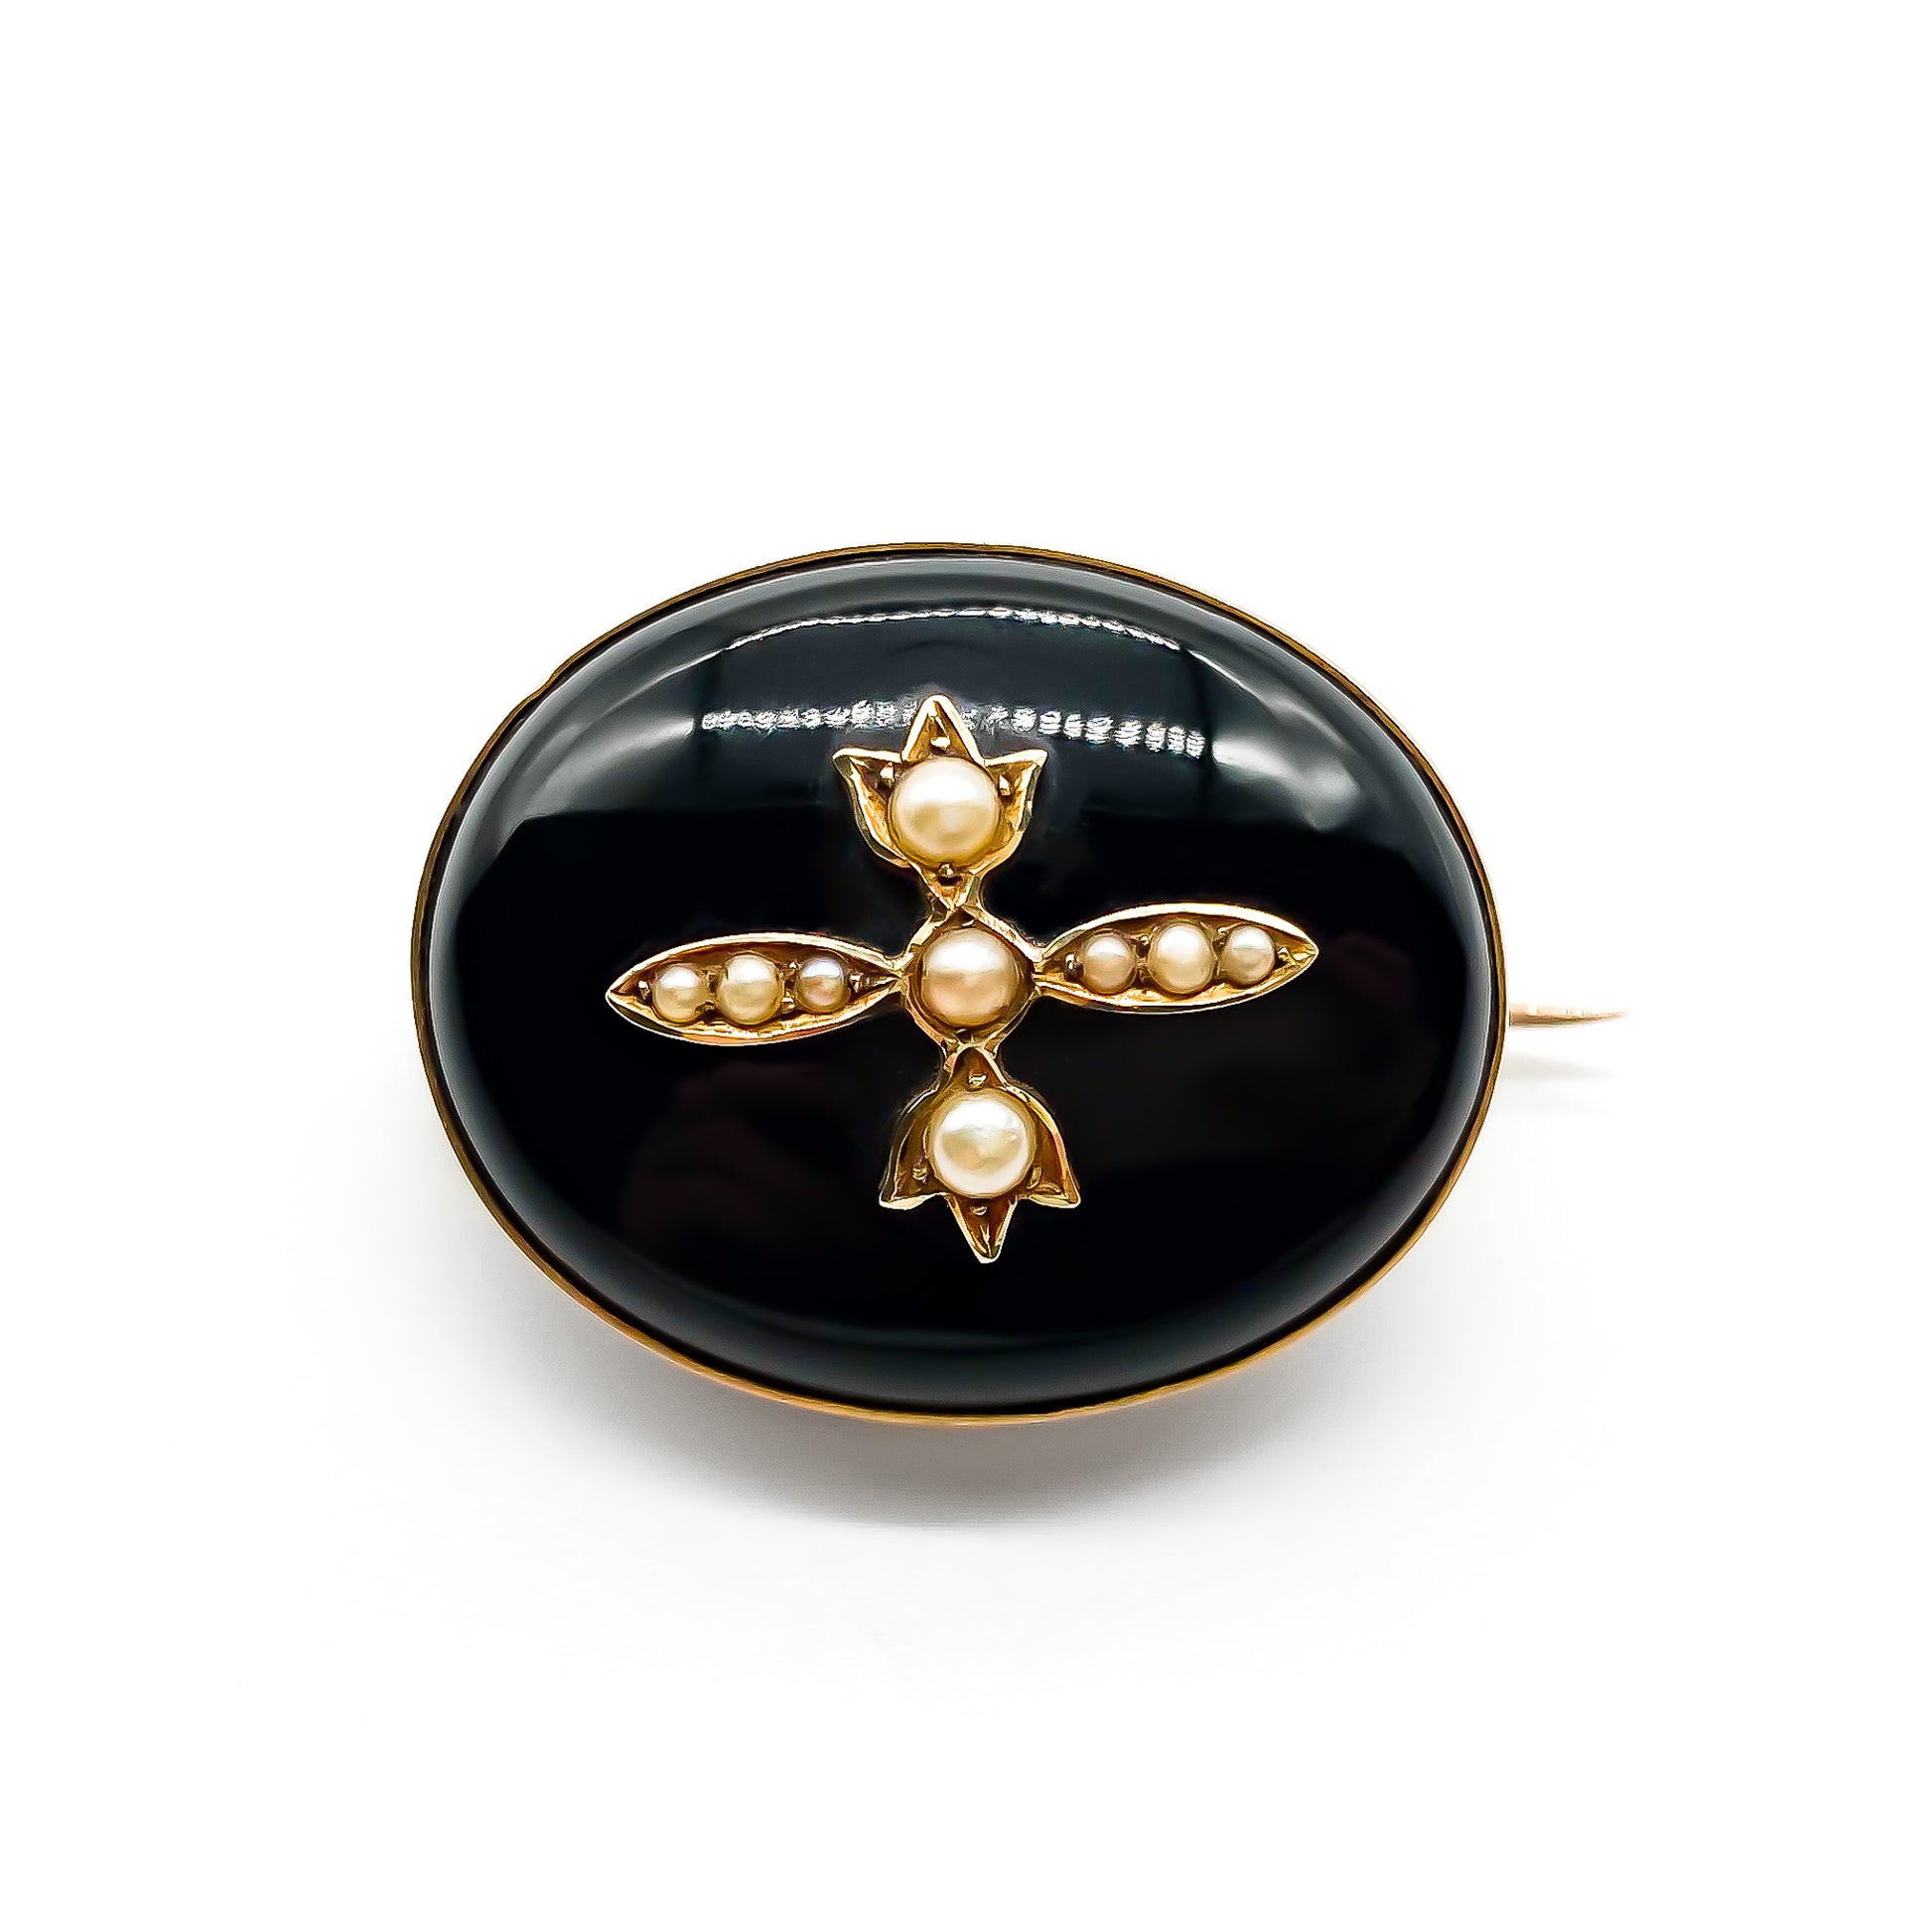 Charming 15ct rose gold mourning brooch set with an oval onyx cabochon with a seed pearl motif in centre. Brooch has a bevelled glass backing.